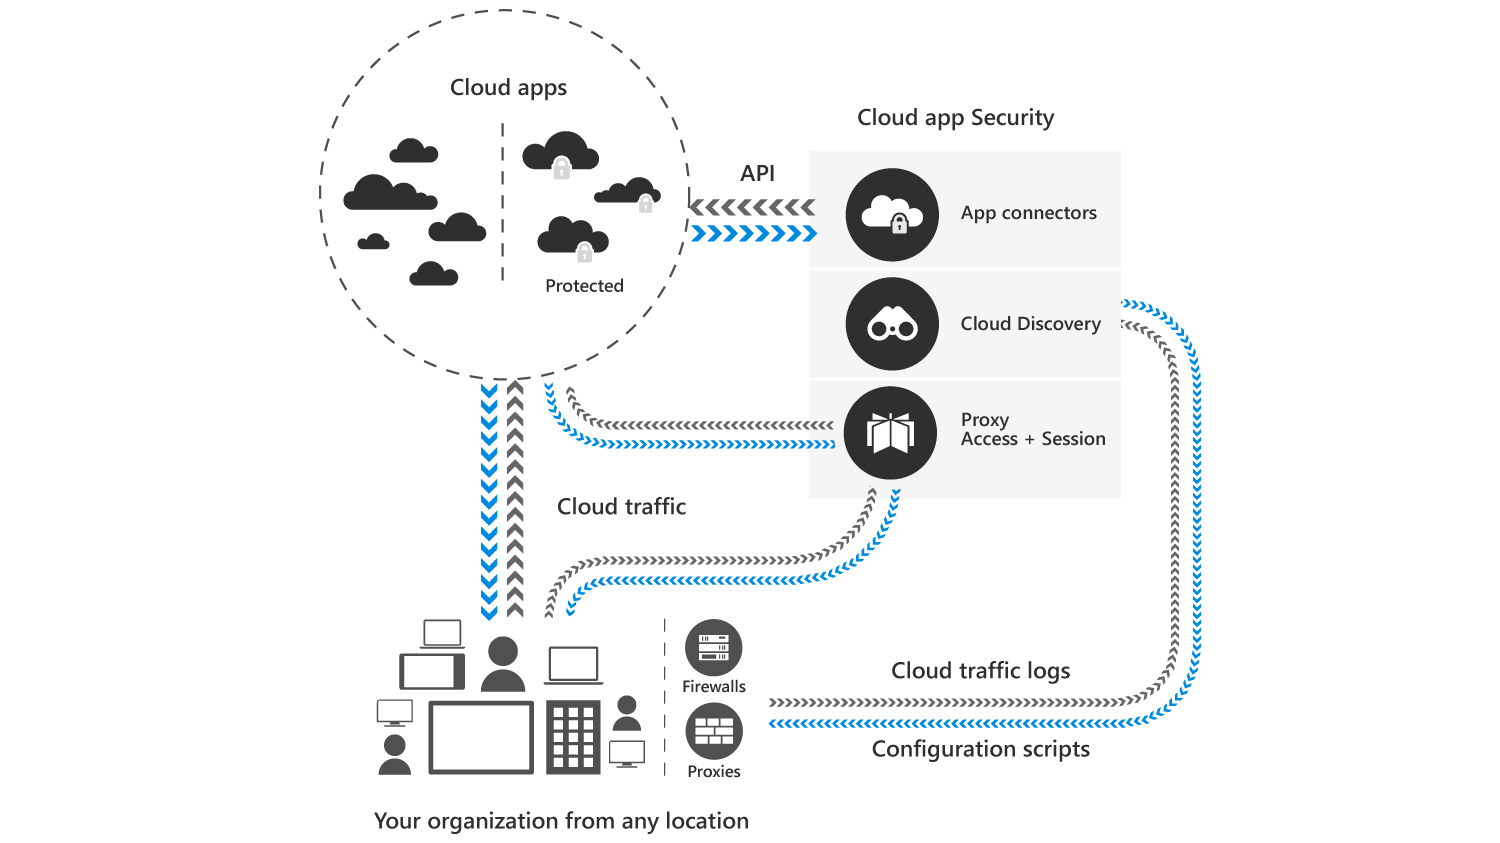 Diagram showing an overview of cloud app security and how it visibly integrates with the cloud.